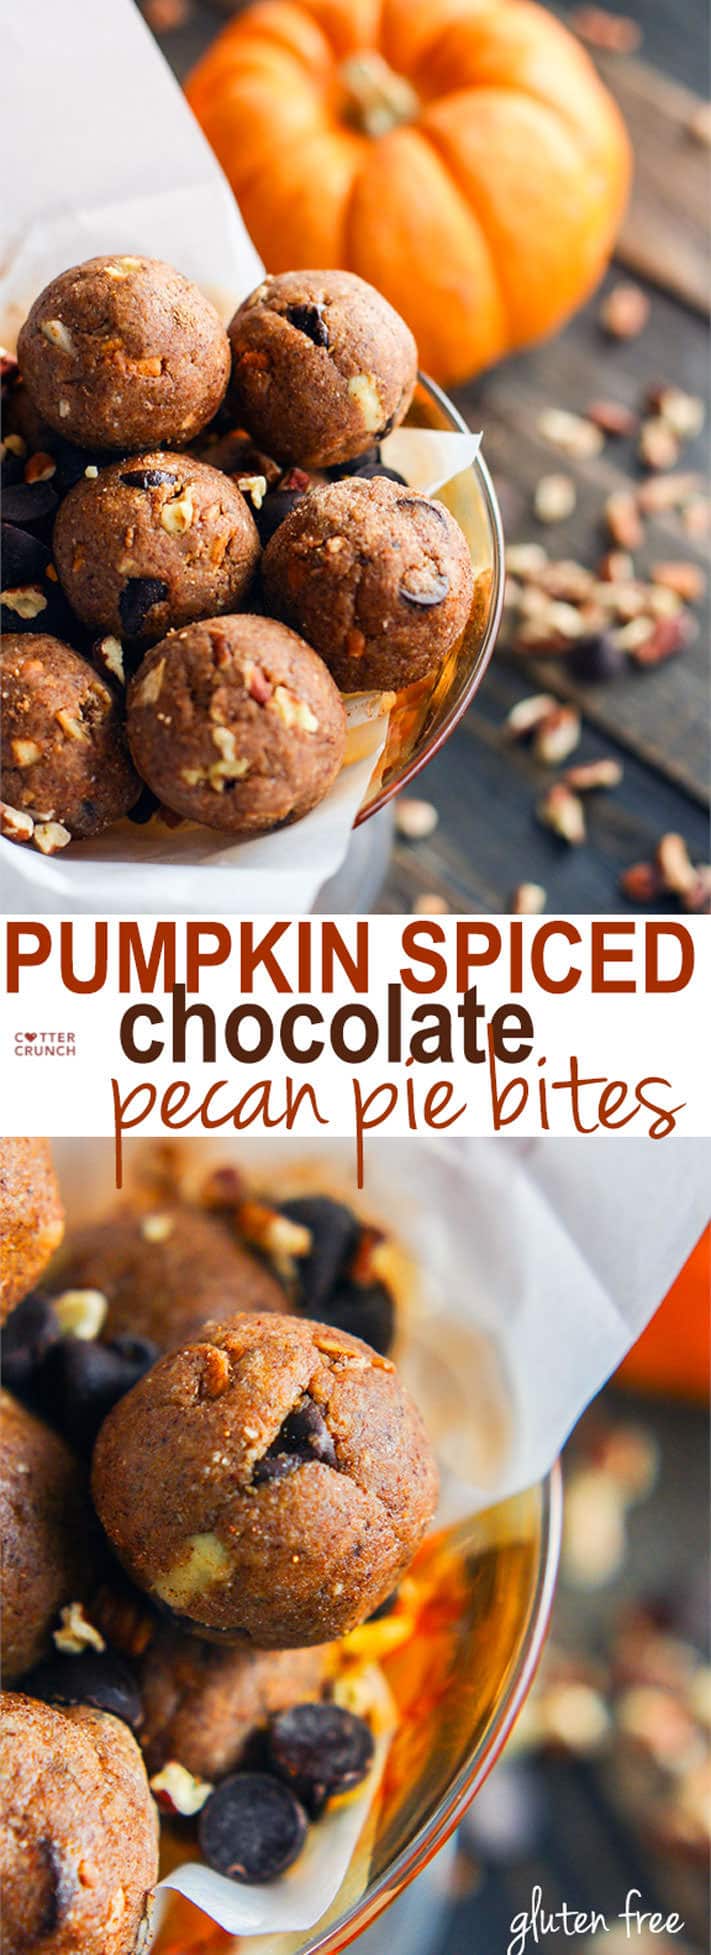 Pumpkin spiced chocolate and pecan pie flavor in one! Healthy, Grain free, easy to make, vegan and paleo friendly, and perfect for Holiday desserts or snacking! So worth making again and again! @cottercrunch